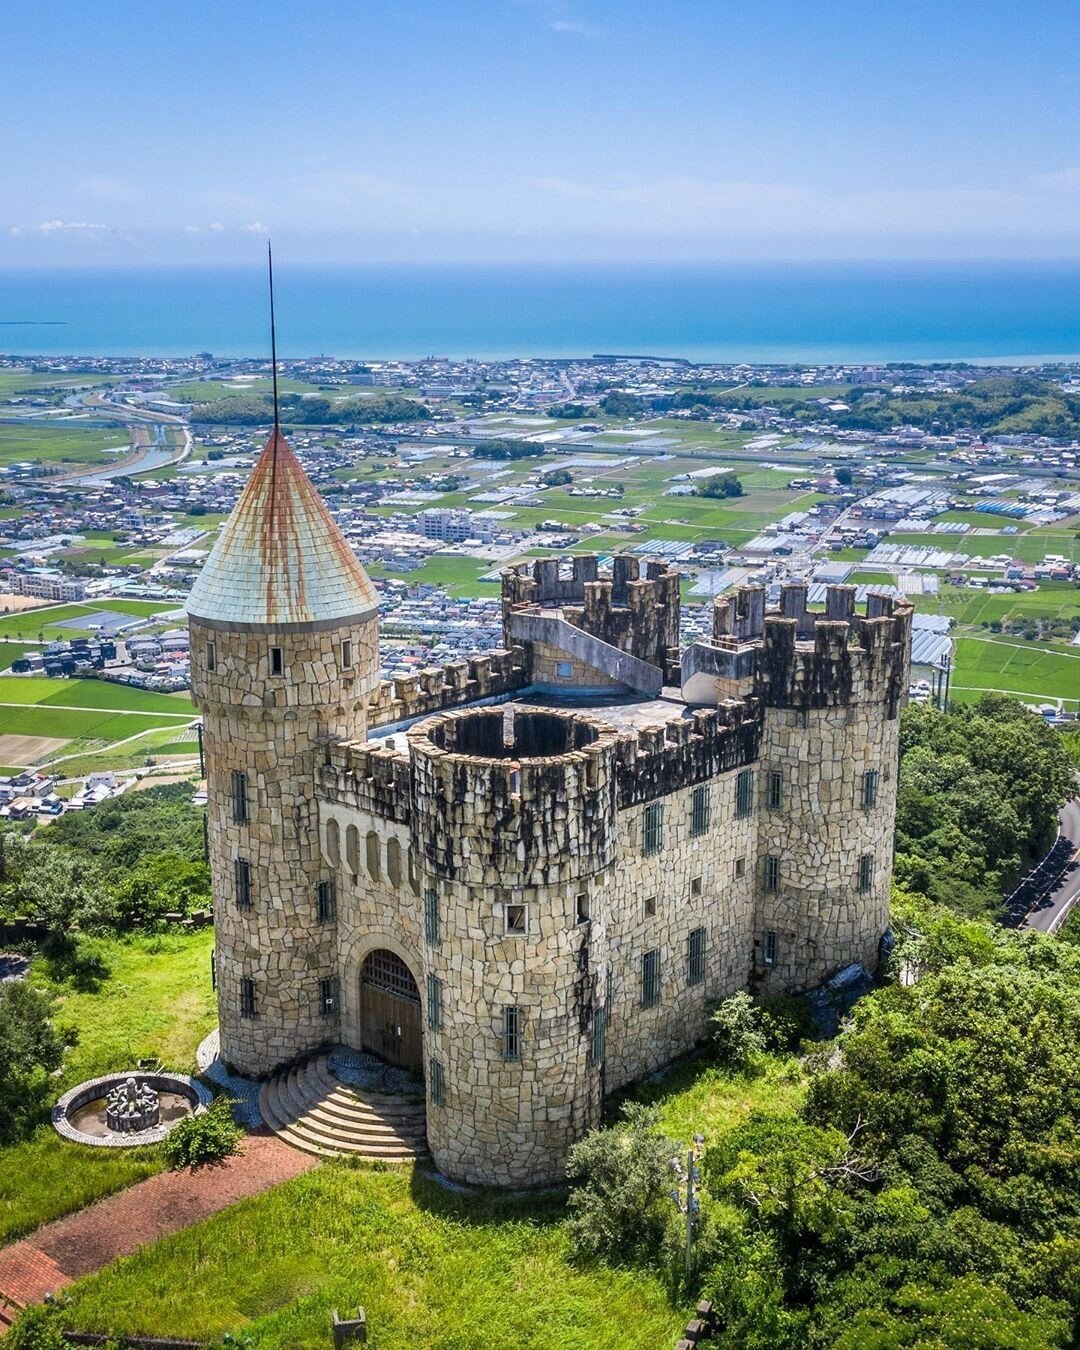 🇪🇸 Spain? 🏴󠁧󠁢󠁥󠁮󠁧󠁿 England? No! Believe it or not, this 🏰  Spanish castle is located in 🇯🇵 #Japan. Built in 1973 at the summit of ⛰ Mt. Sanpo in #Konan City, hence its name &quot;Chateu Sanpo&quot;. It offers a view of Konan and #Kochi cit